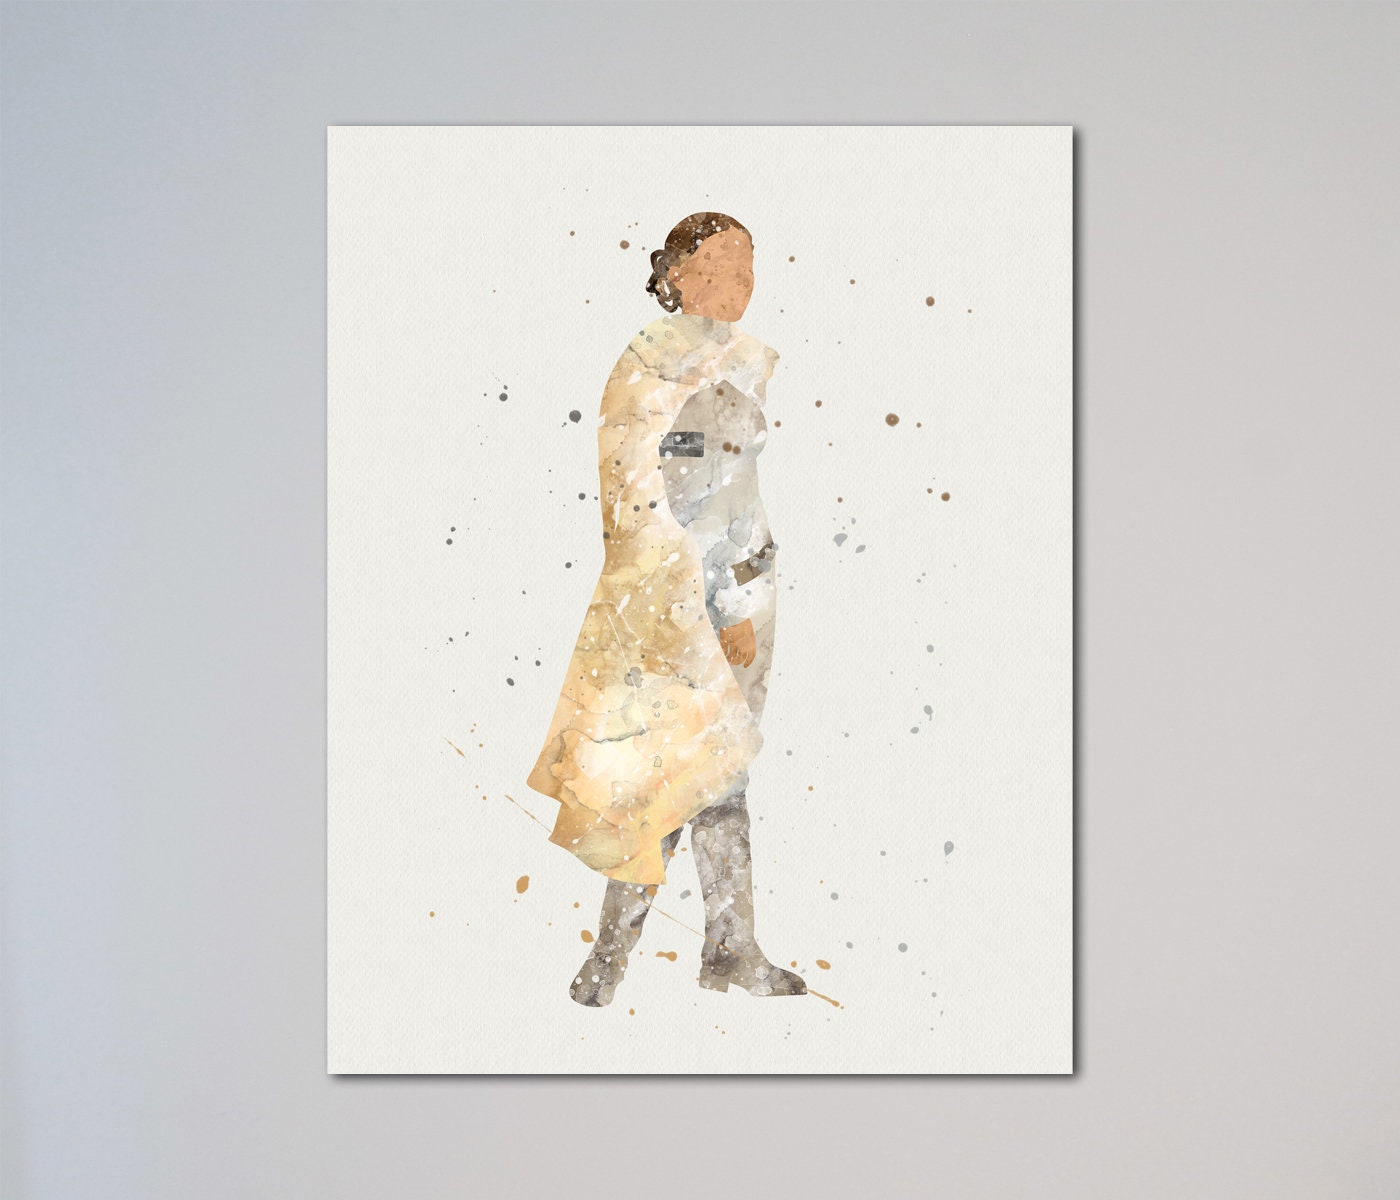 Star Wars Padme Amidala Poster Watercolor Art Print gift for her gift for him